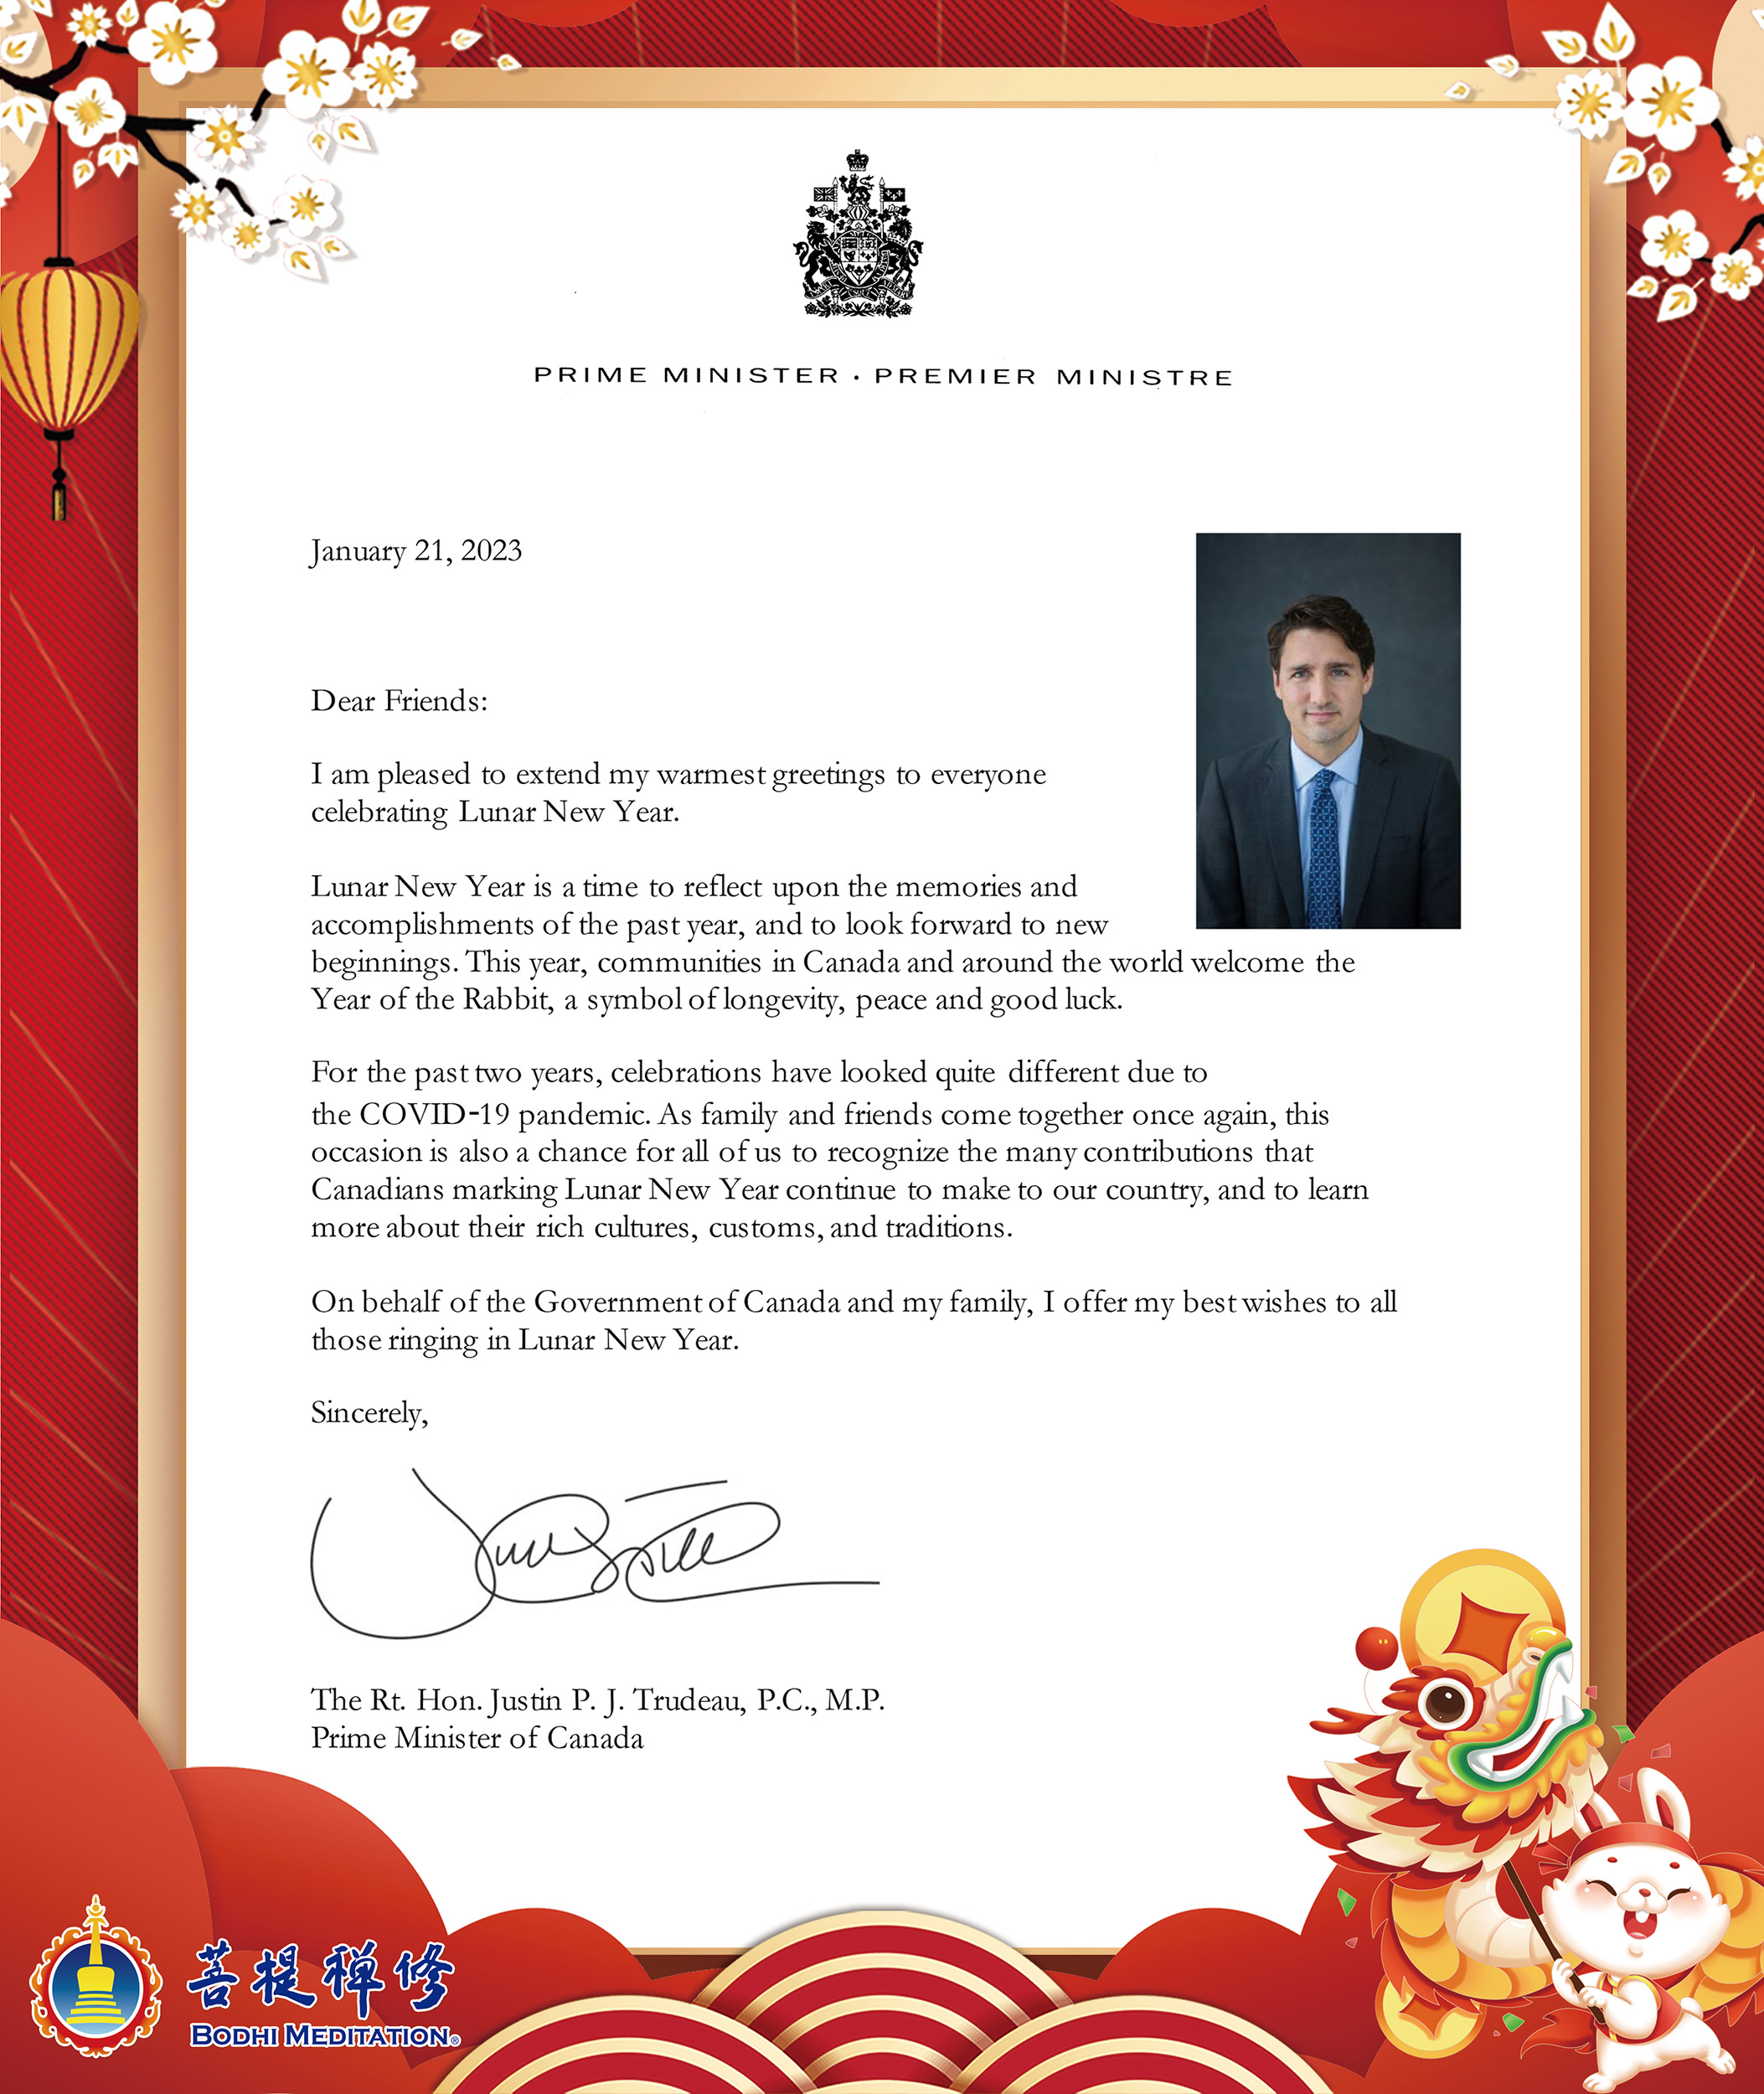 The Prime Minister, Premier and Mayor Extend Warmest Wishes for